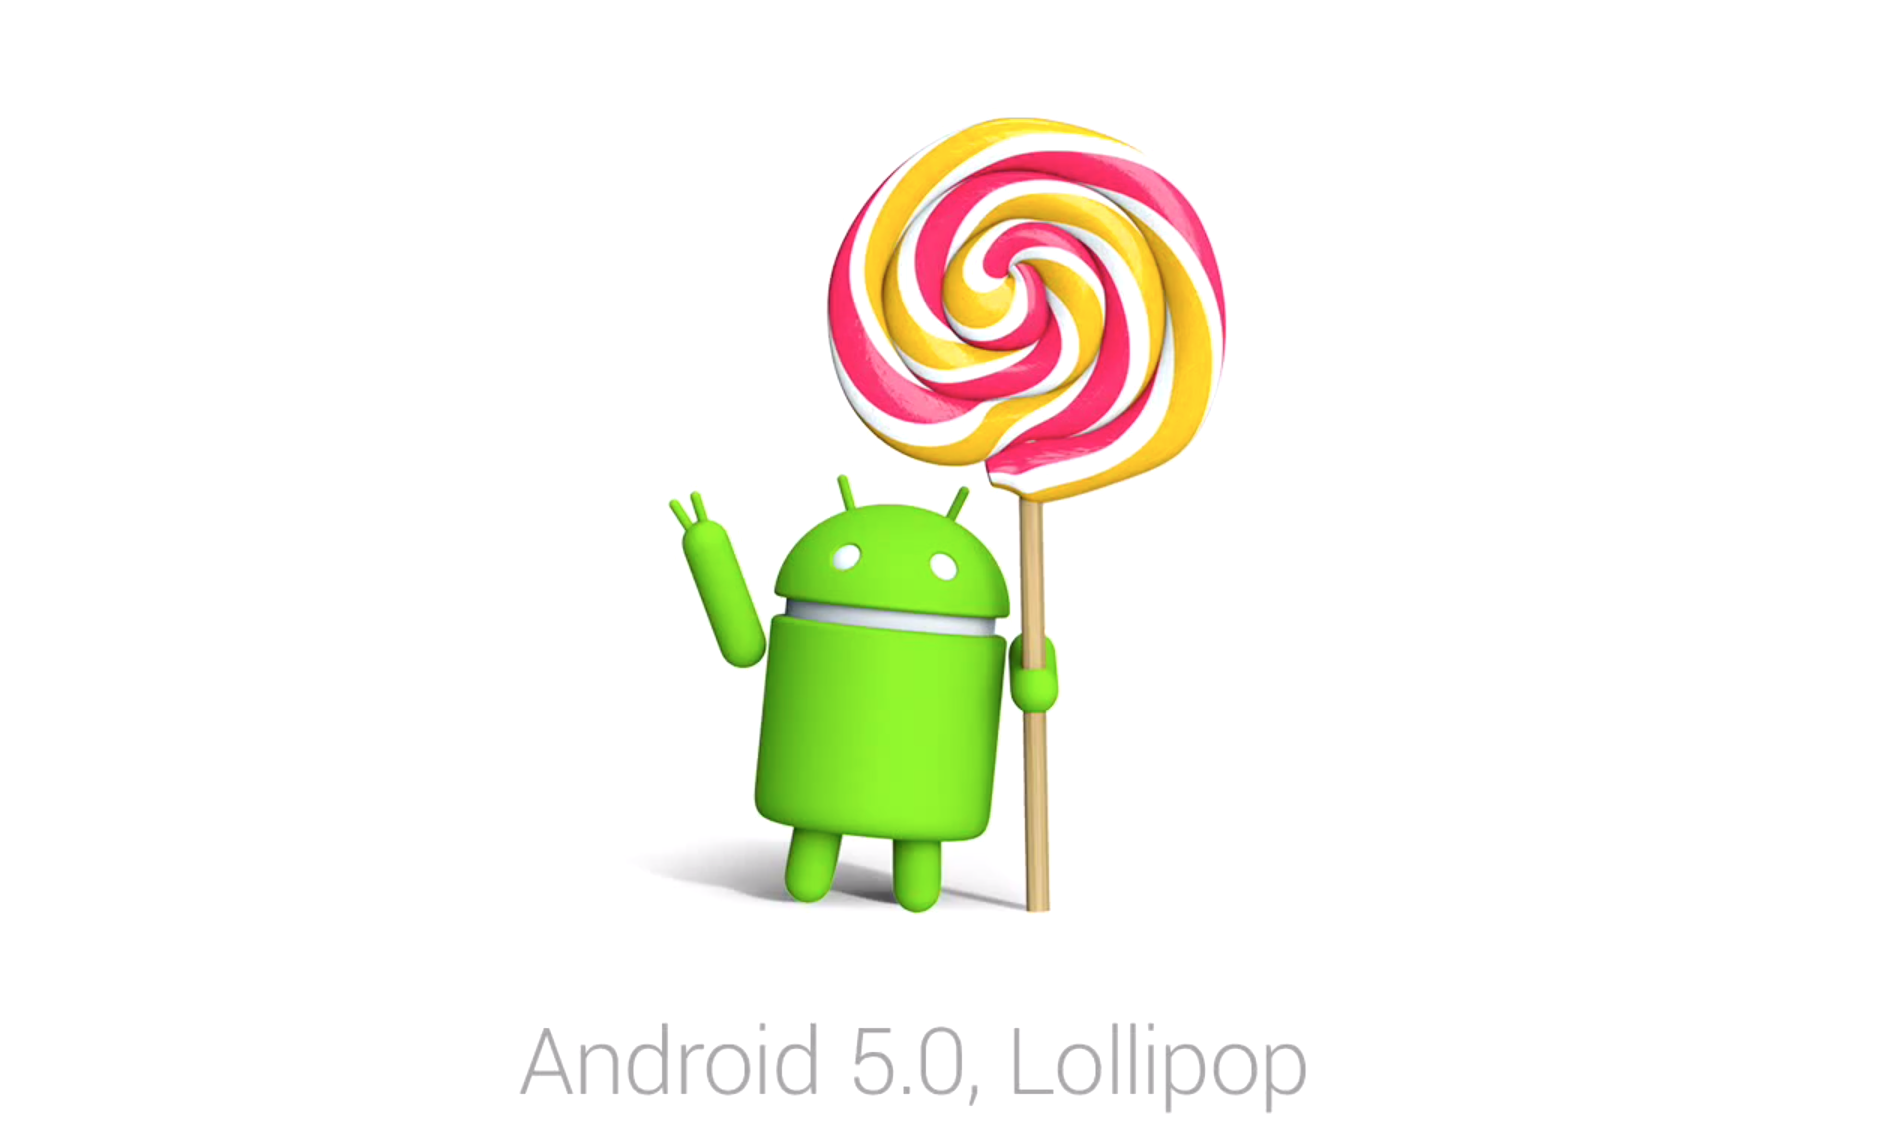 Android-5.0-Lollipop-Bugdroid.png